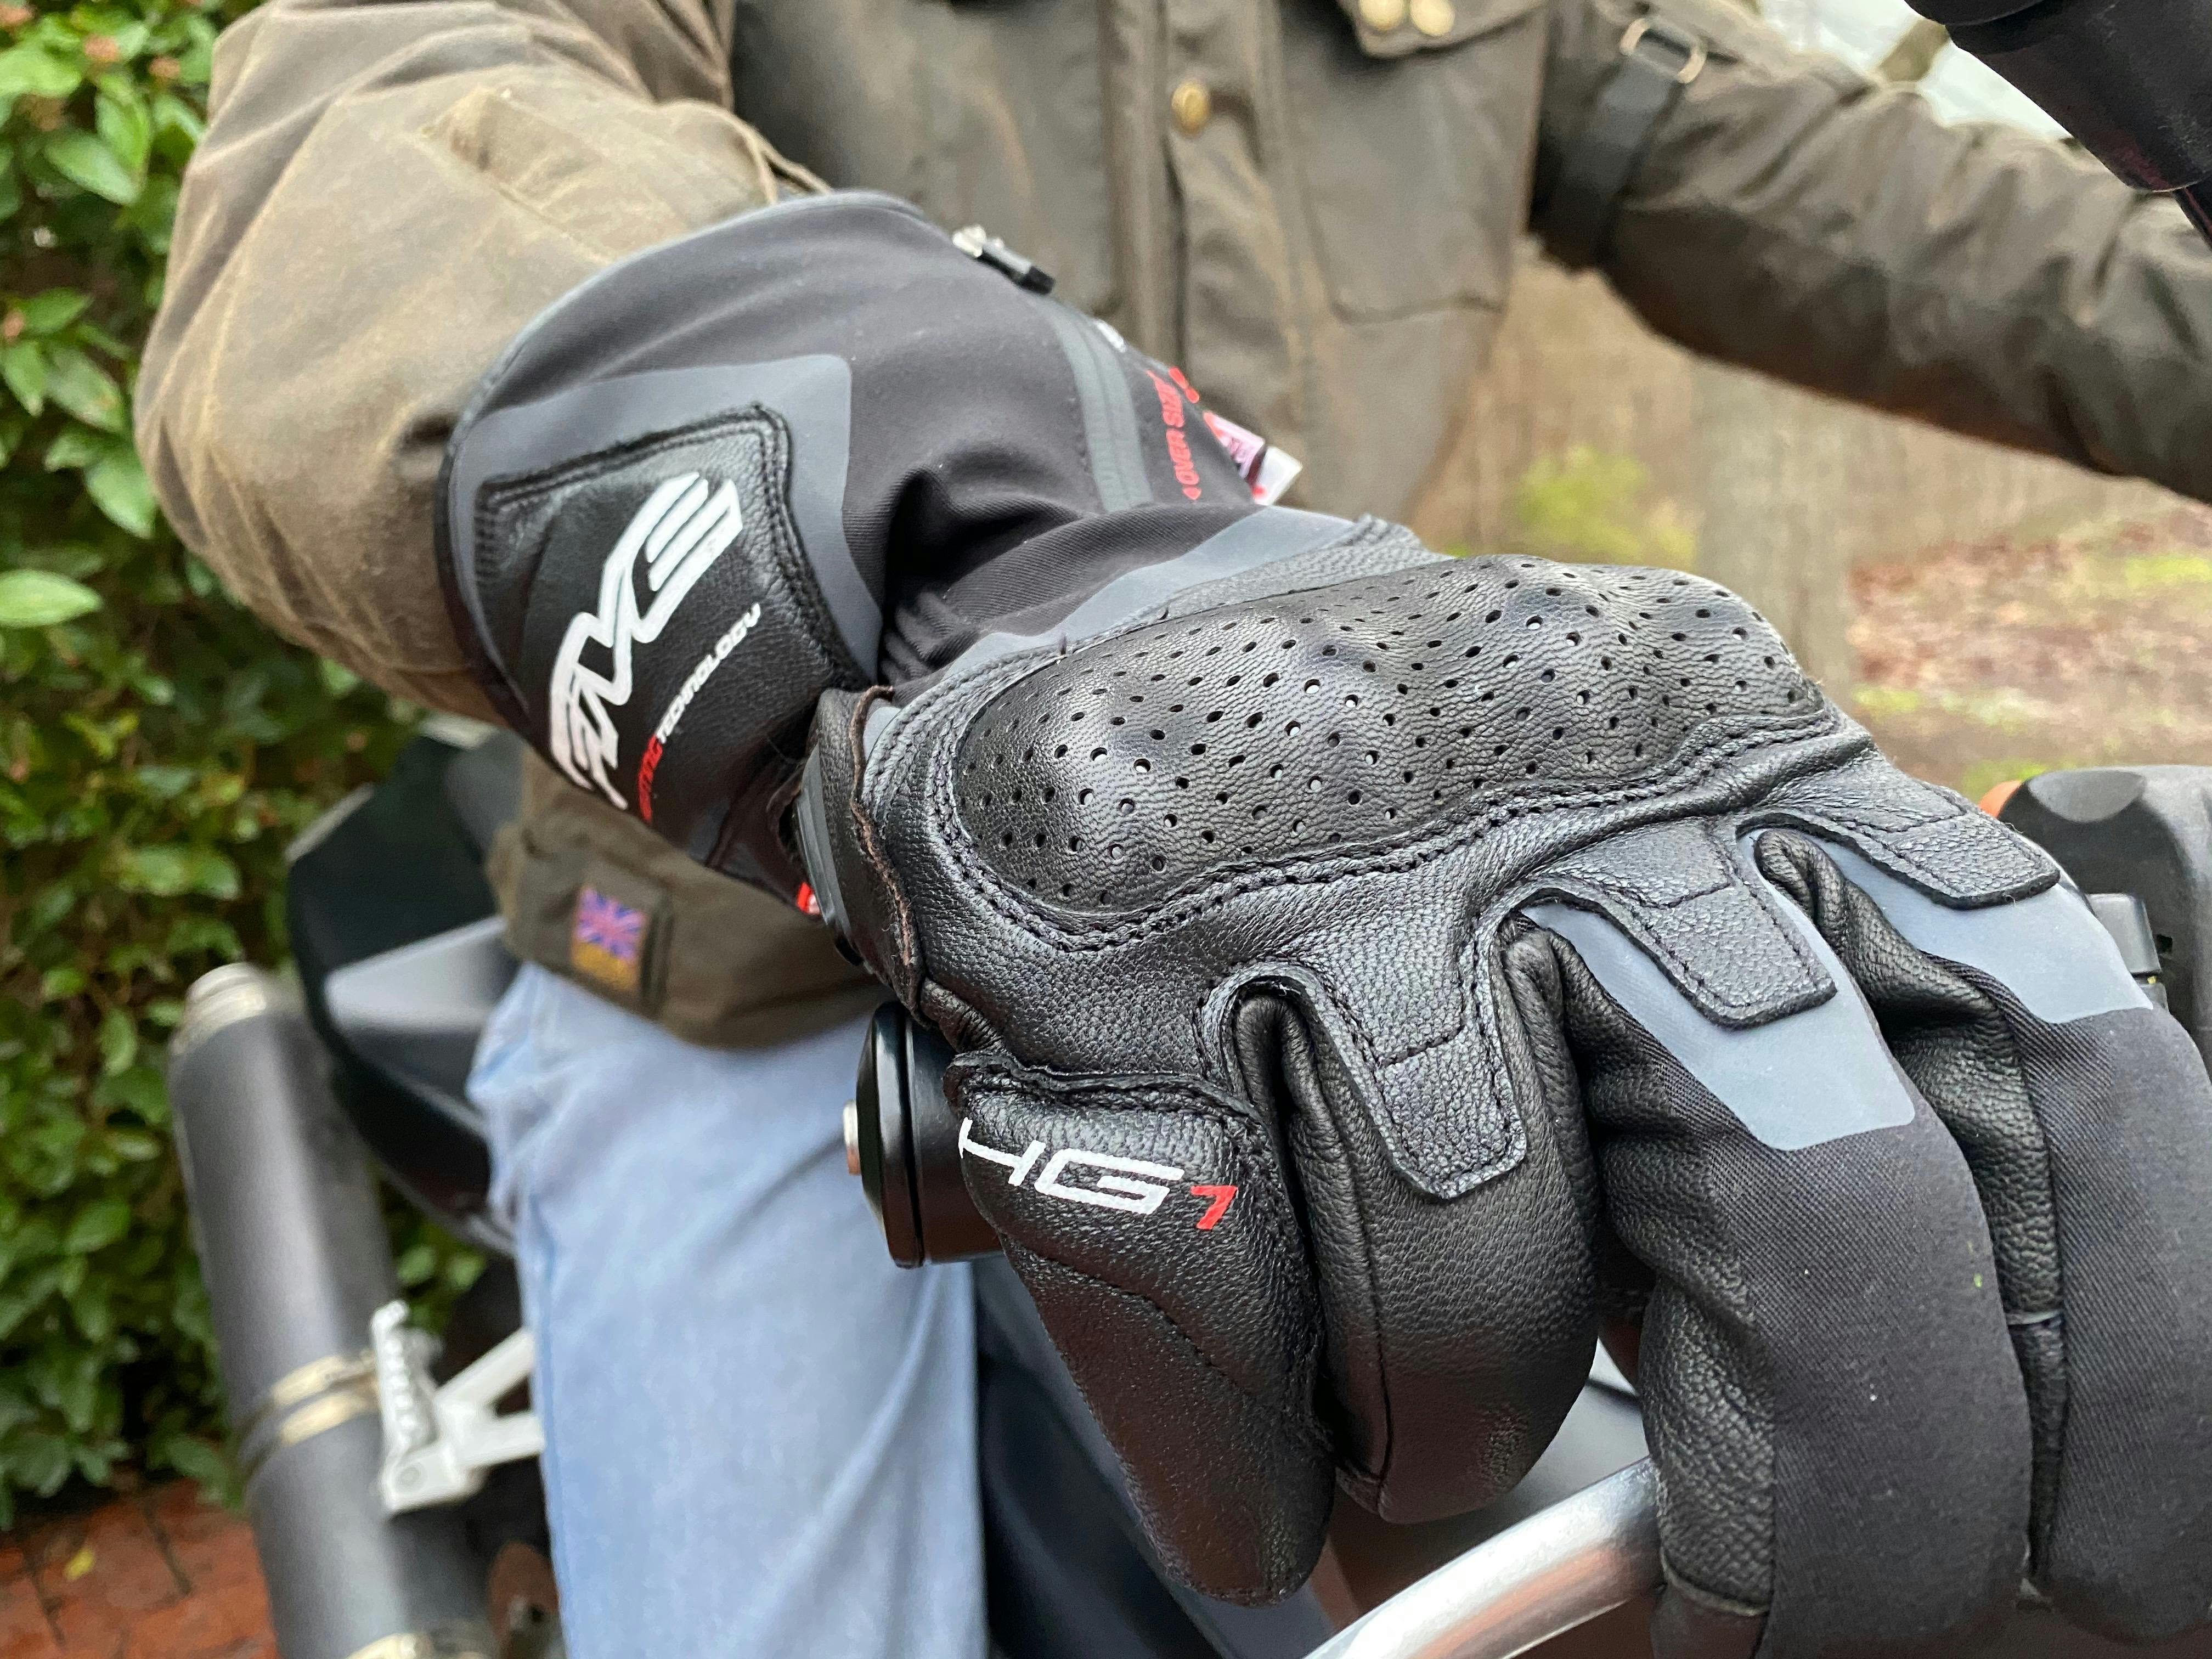 The Five HG-1 heated glove on a mans hand on a motorcycle handlebar